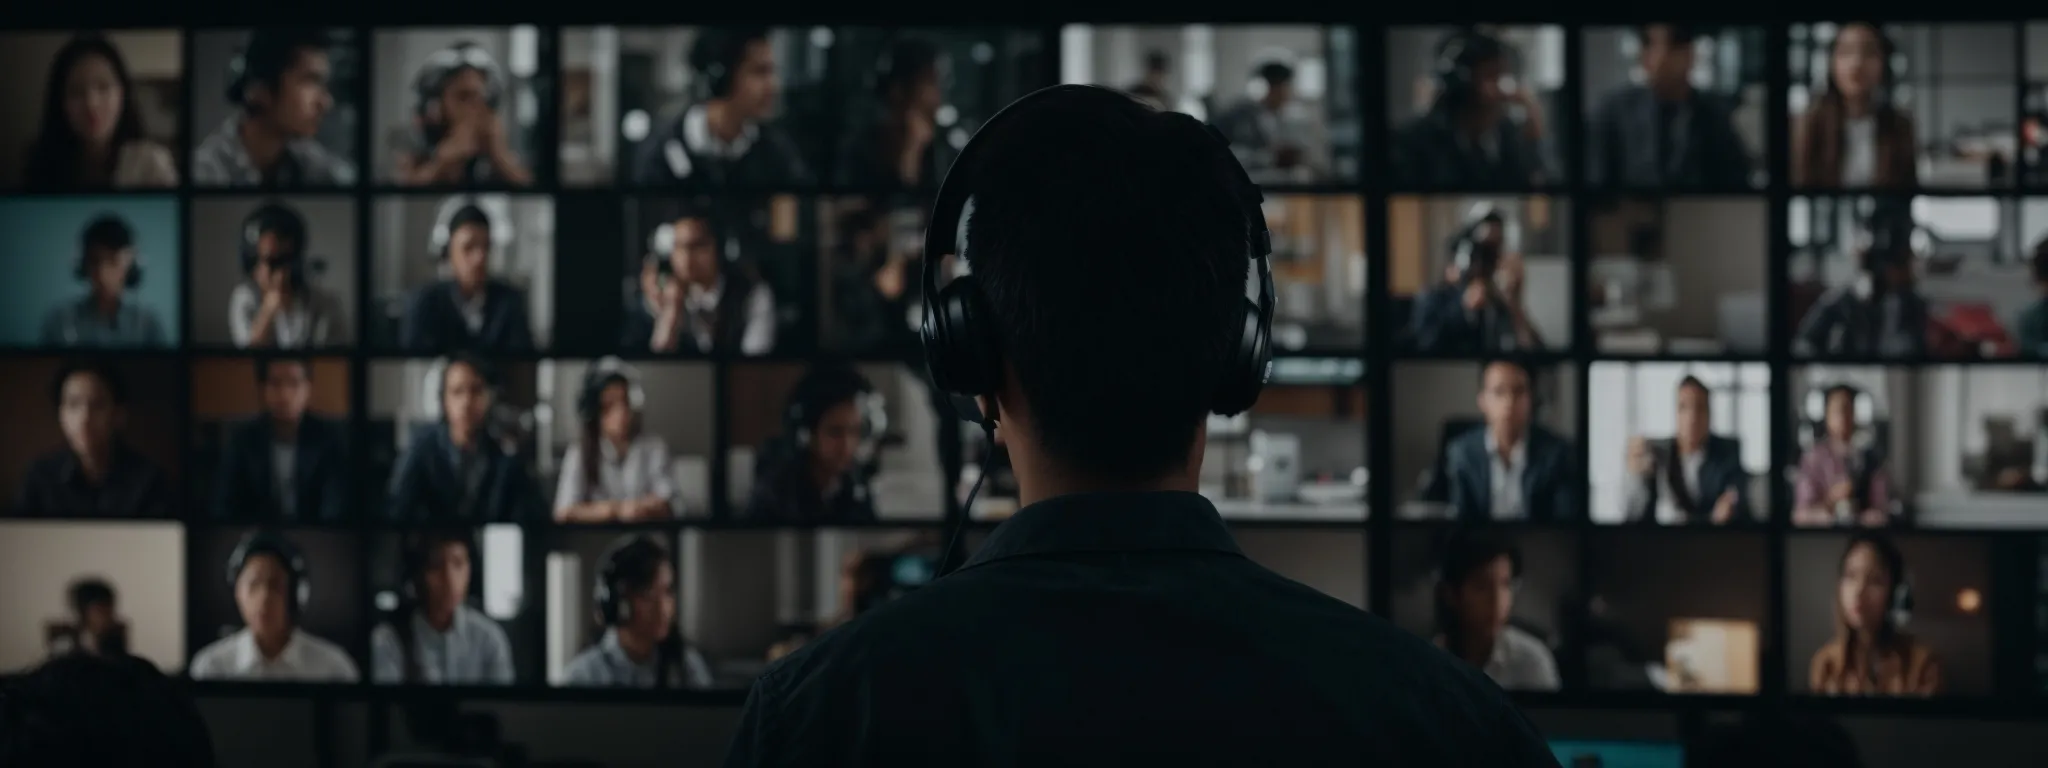 a person wearing a headset, gazing at a large screen displaying multiple video call participants with virtual backgrounds.